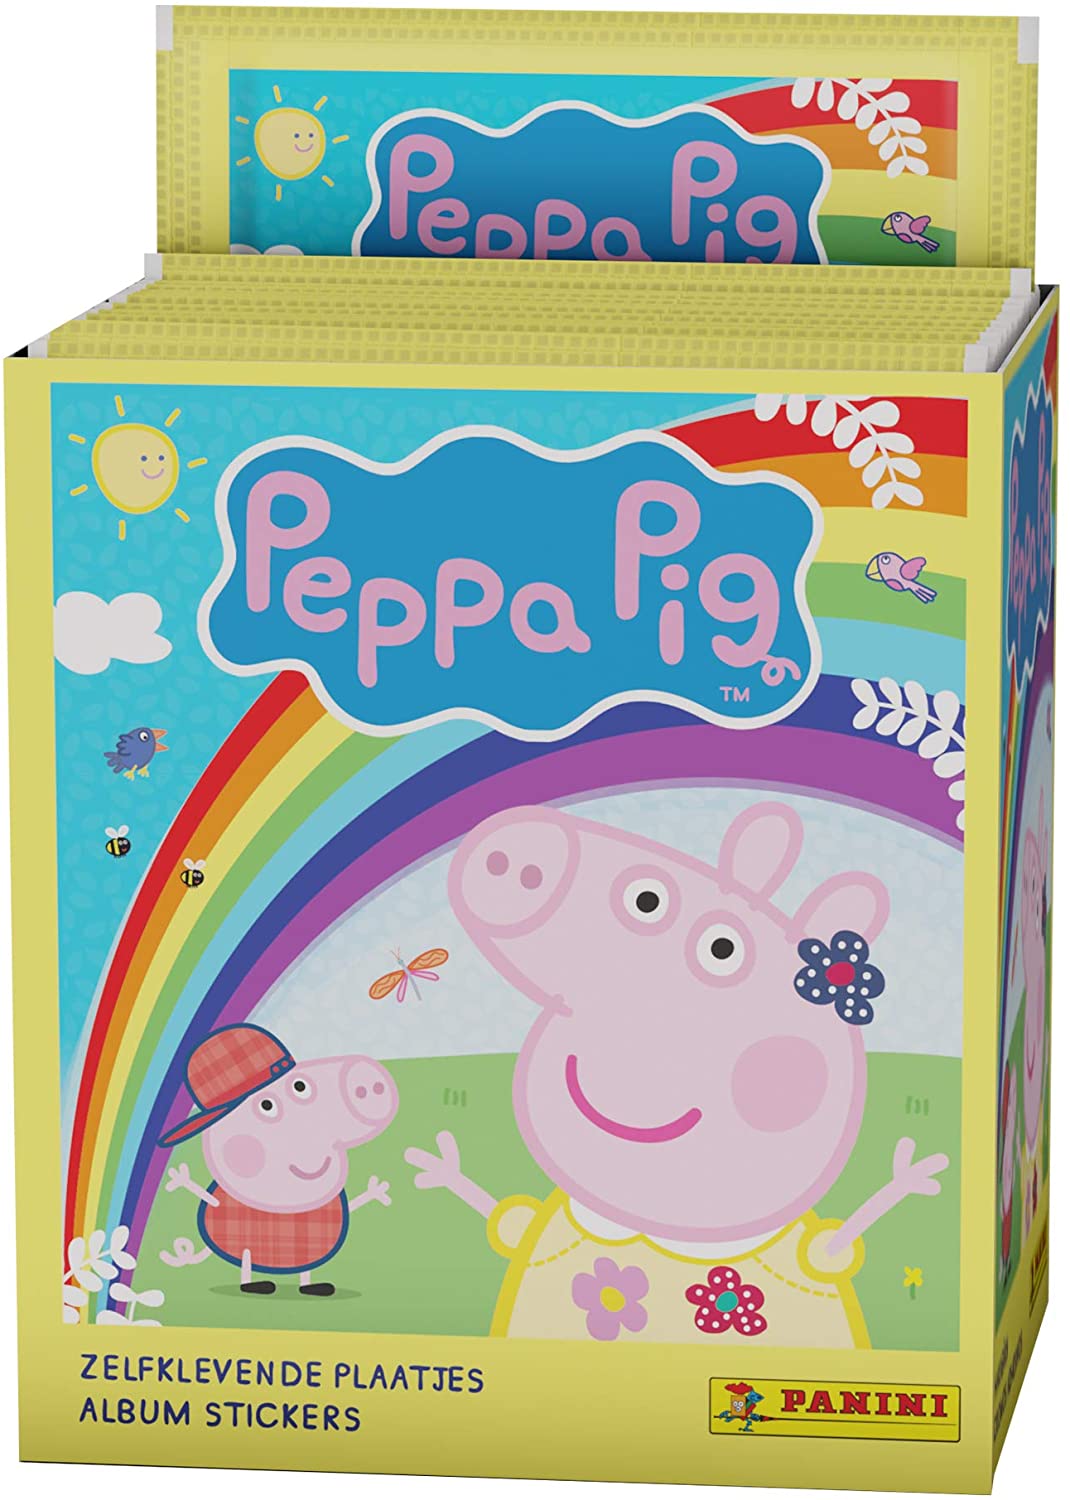 Peppa Pig My Favourite Things Album Stickers Panini X 5 Packets Sealed New 